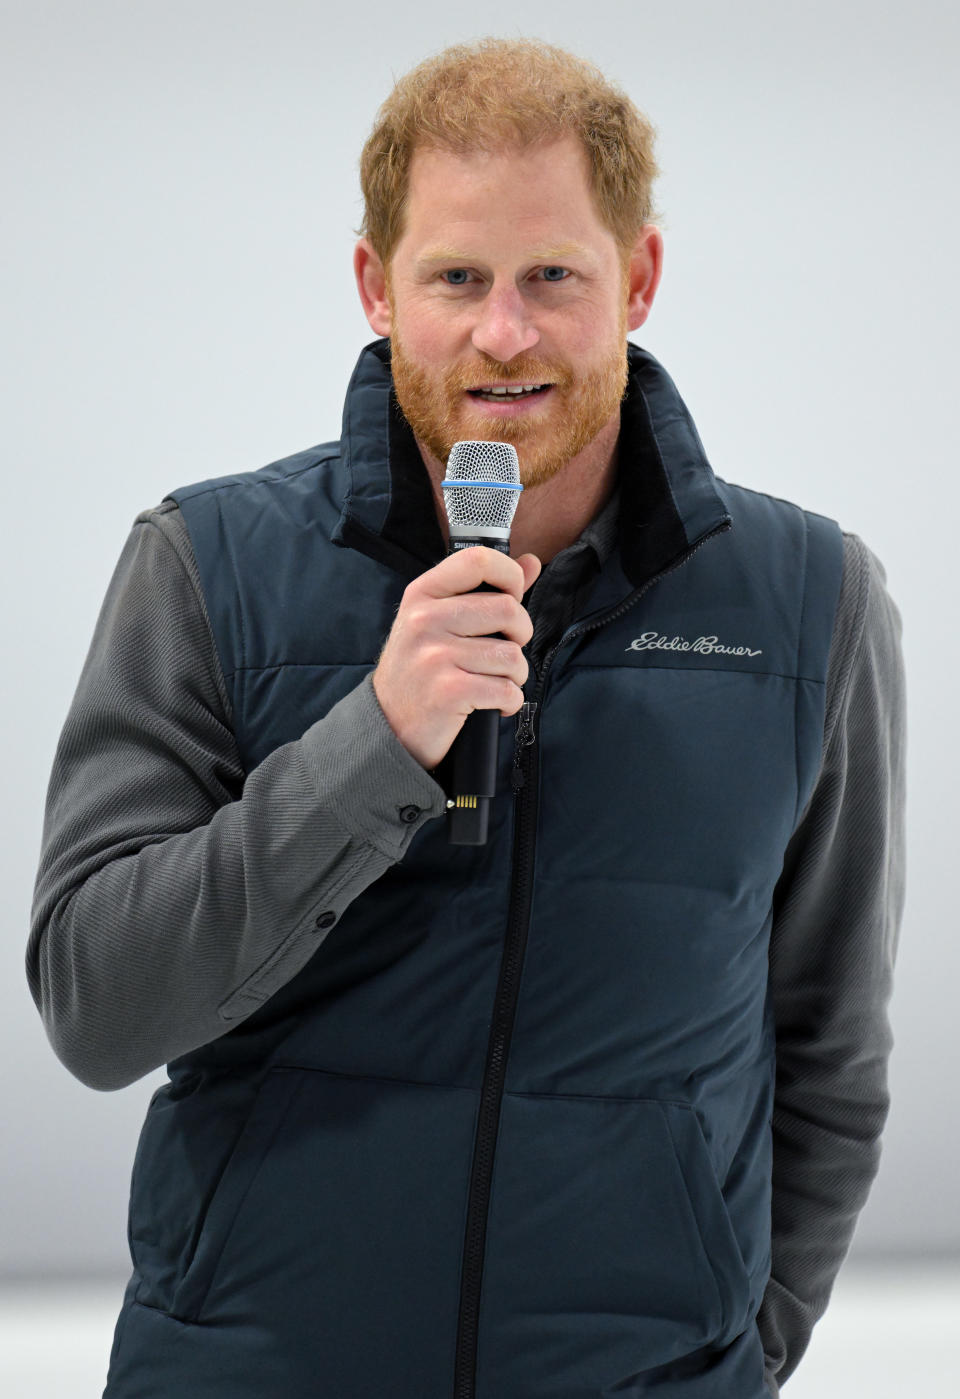 Prince Harry Is Returning to the U.K.